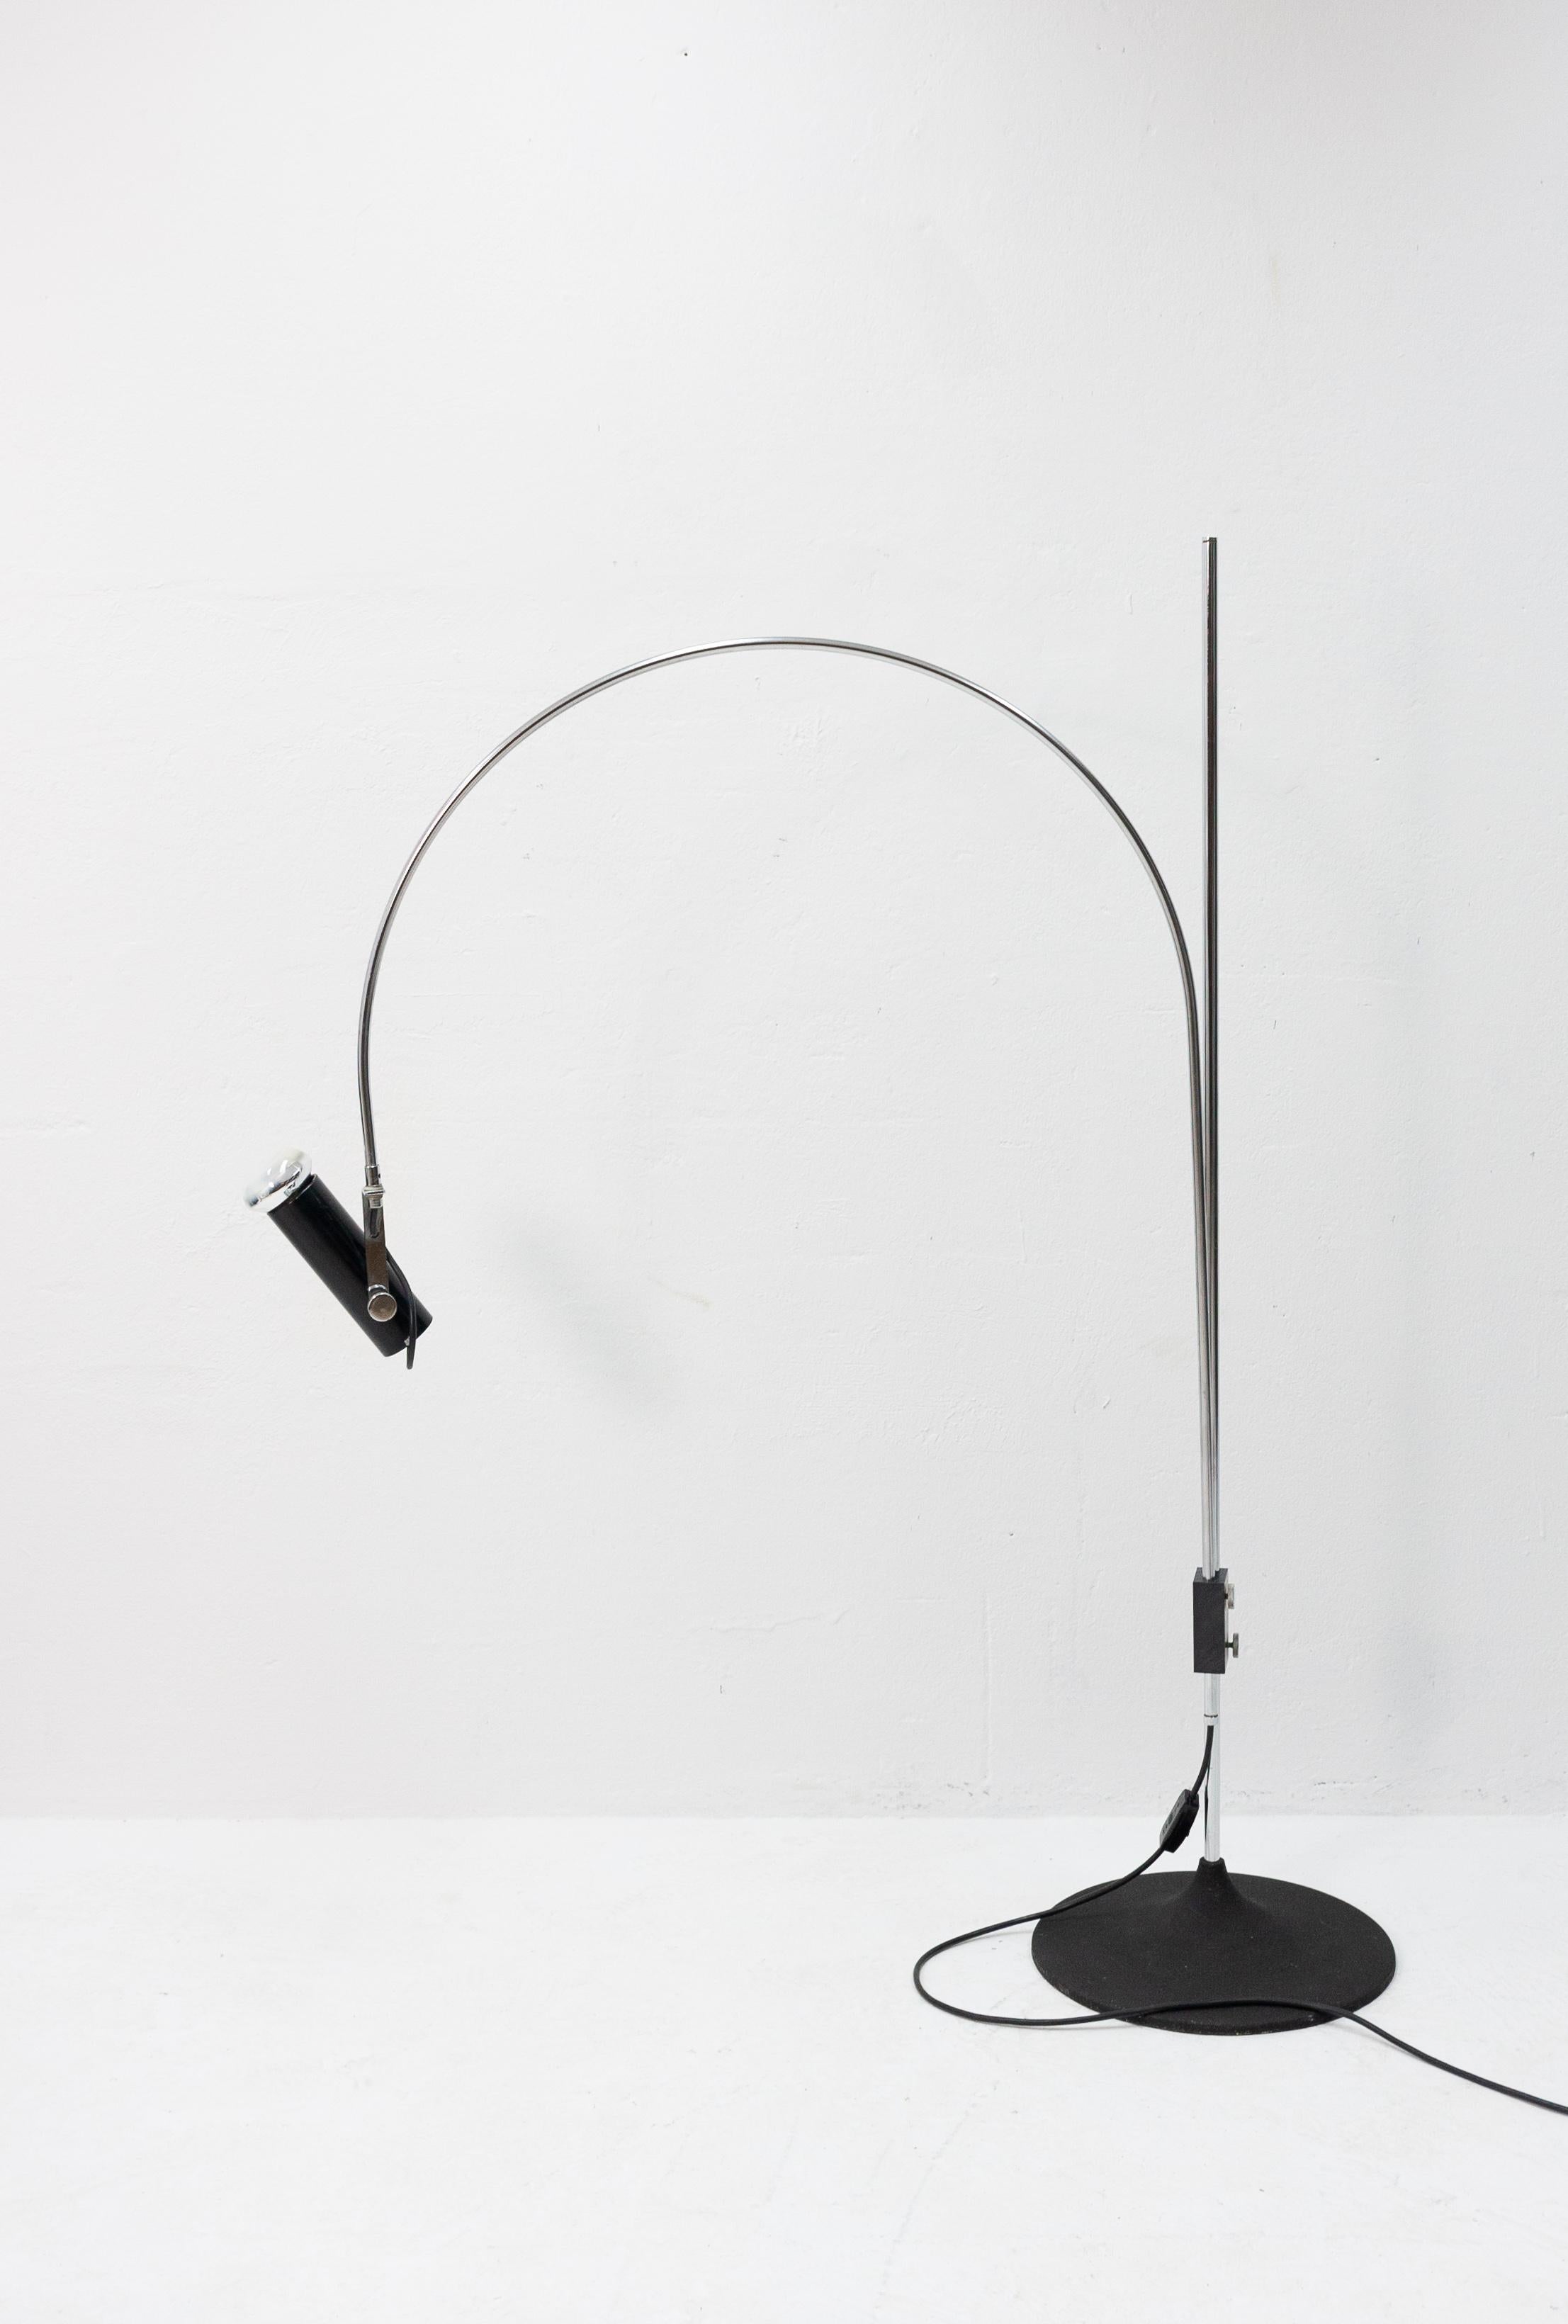 Elegant height-adjustable arc lamp designed by the Postumus brothers for Gepo Amsterdam. 1960s.

The height is variable from 116cm (~45 inches) to 190cm (~6ft2).
 